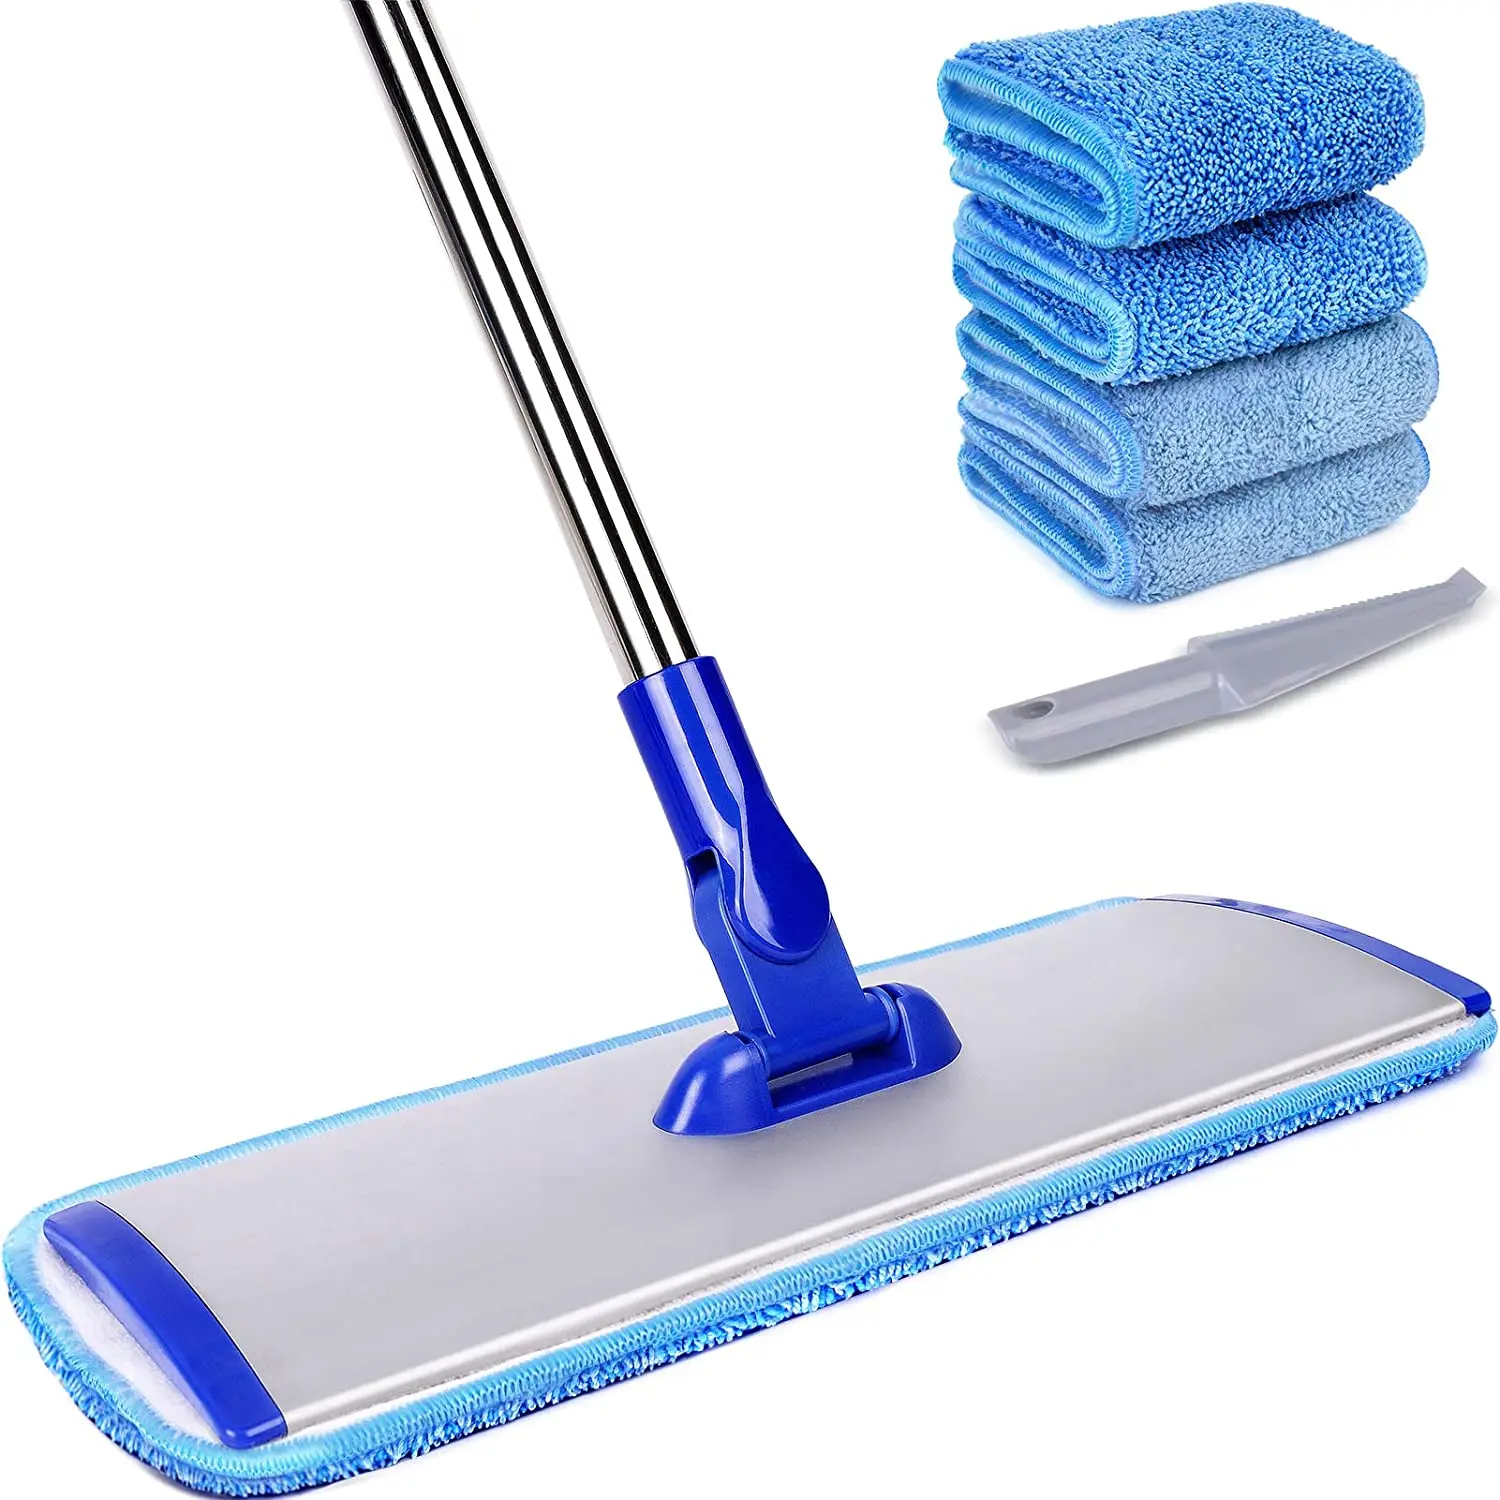 VAIIGO Professional Microfiber Flip Mop,Cleaning Flat Mops with 5 Reusable and Machine Washable Pads for Home/Office Wet or Dry Floor 